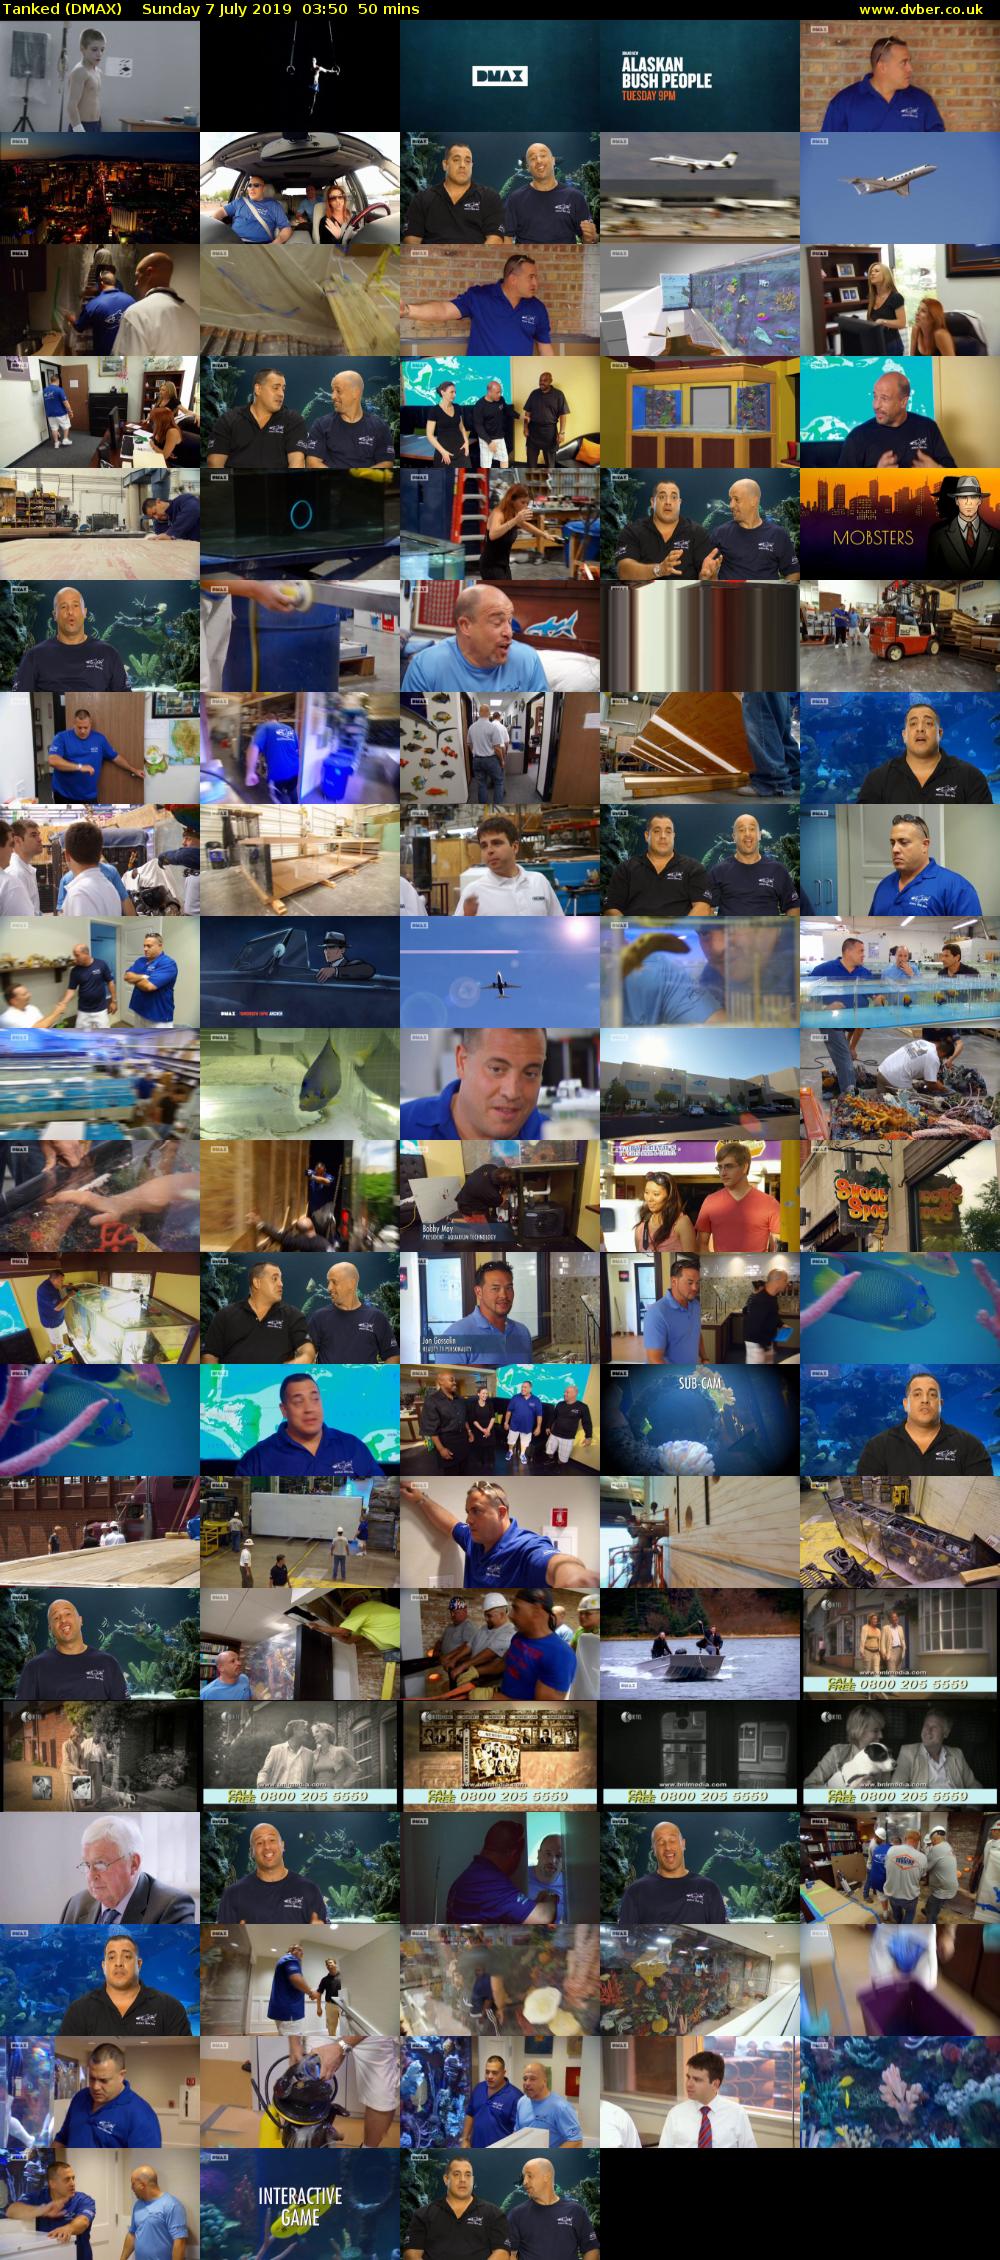 Tanked (DMAX) Sunday 7 July 2019 03:50 - 04:40